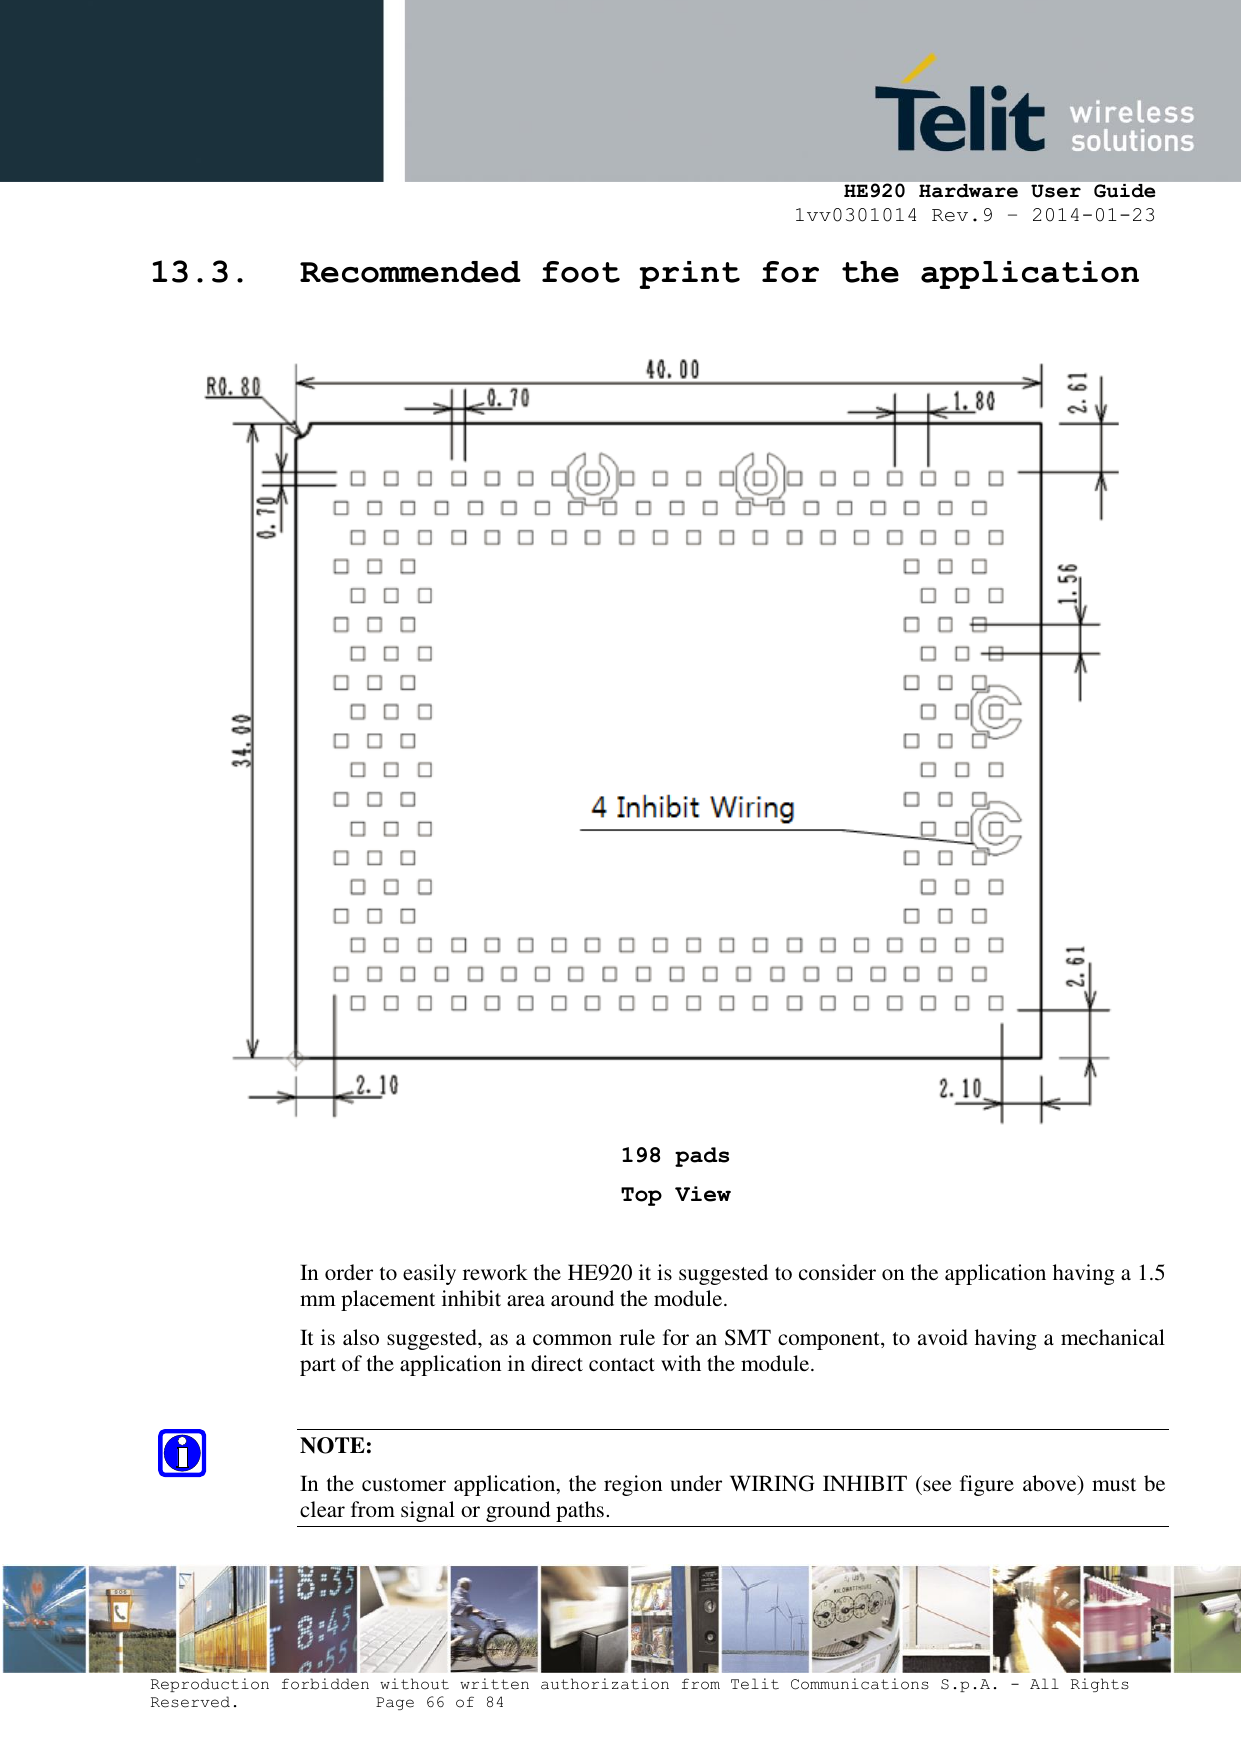     HE920 Hardware User Guide 1vv0301014 Rev.9 – 2014-01-23 Reproduction forbidden without written authorization from Telit Communications S.p.A. - All Rights Reserved.    Page 66 of 84  13.3. Recommended foot print for the application   198 pads Top View  In order to easily rework the HE920 it is suggested to consider on the application having a 1.5 mm placement inhibit area around the module.  It is also suggested, as a common rule for an SMT component, to avoid having a mechanical part of the application in direct contact with the module.  NOTE: In the customer application, the region under WIRING INHIBIT (see figure above) must be clear from signal or ground paths. 